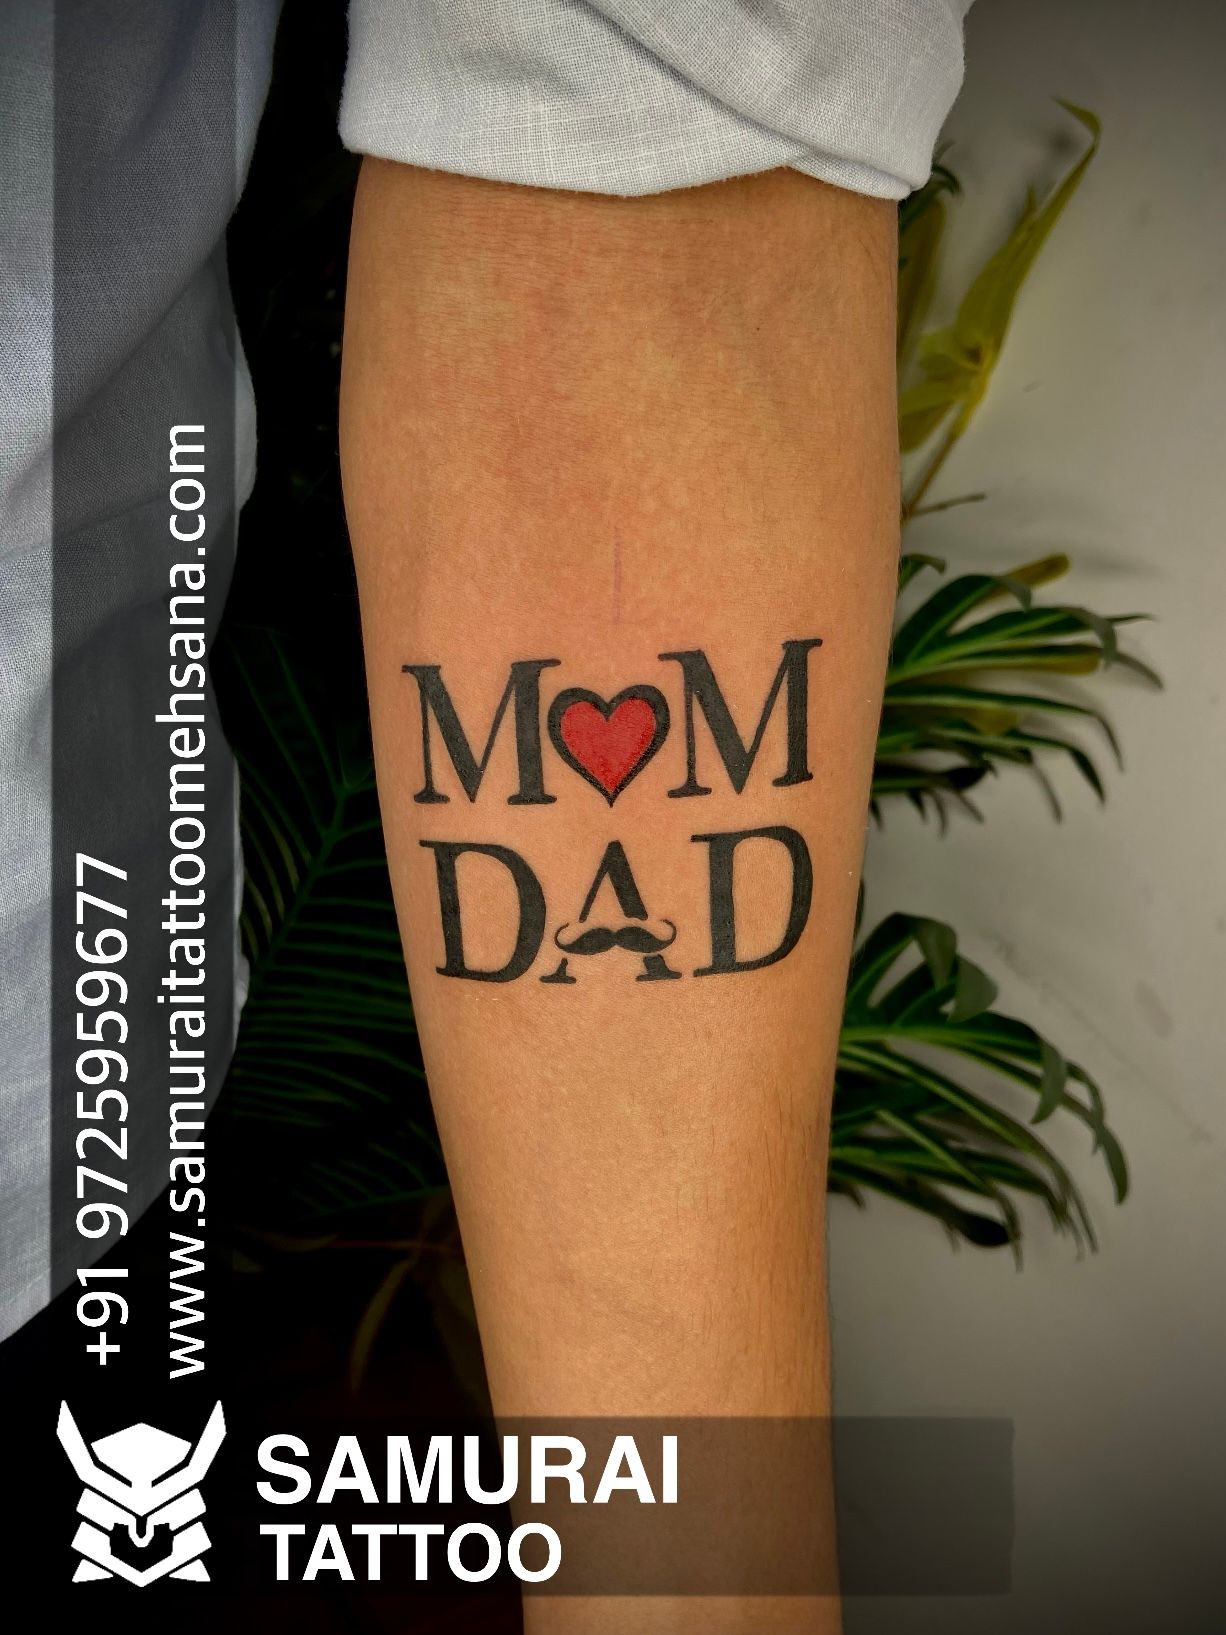 Buy Mom and Dad Tattoos Online In India - Etsy India